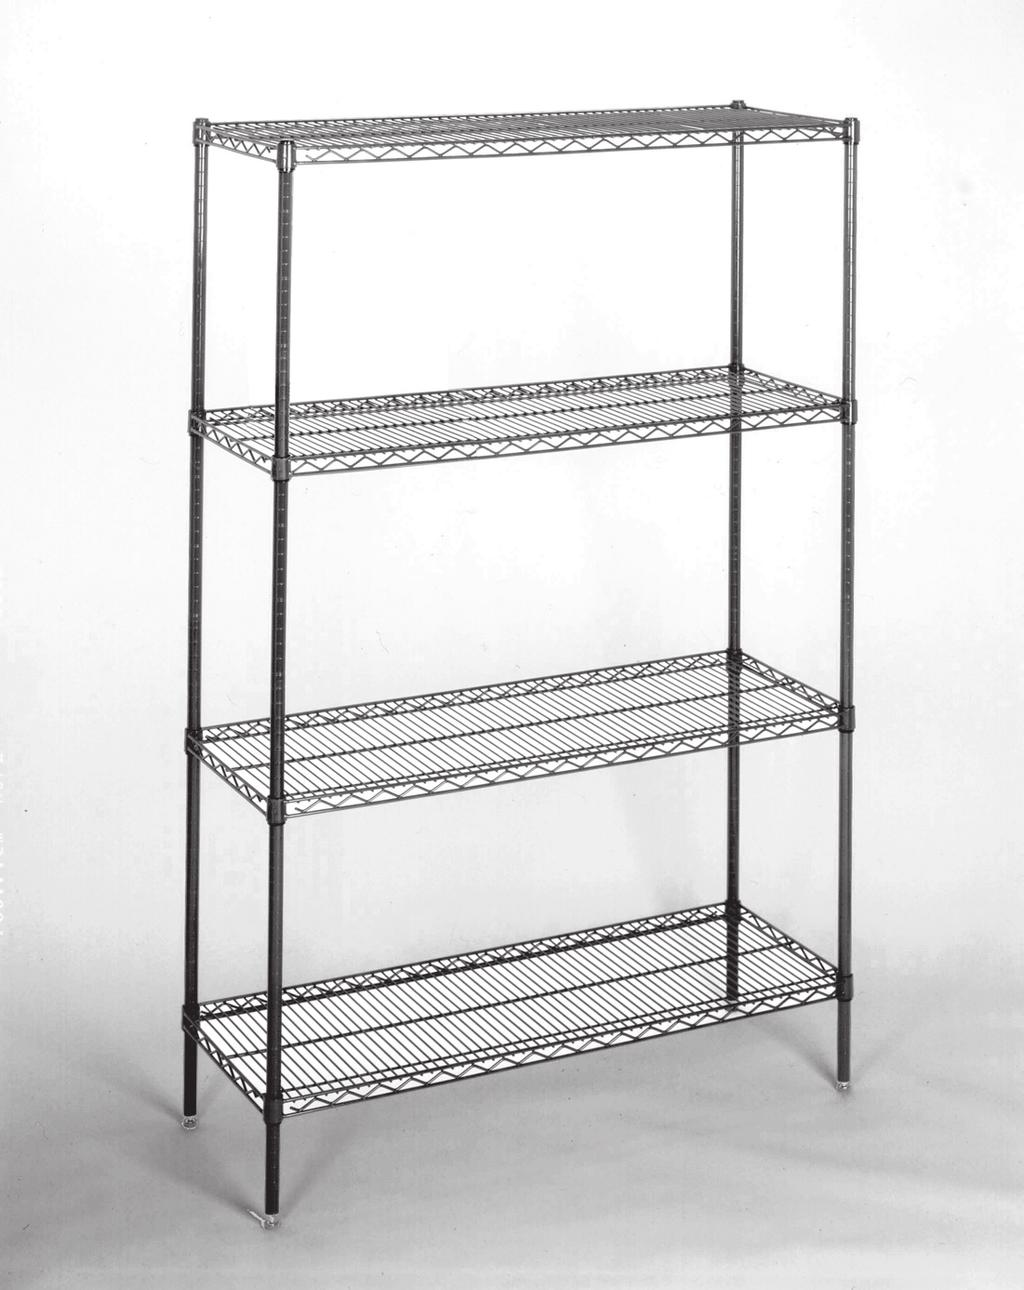 Shelving kits Shelving kits specifically designed for each Kold Locker walk-in configuration are offered as an optional extra.